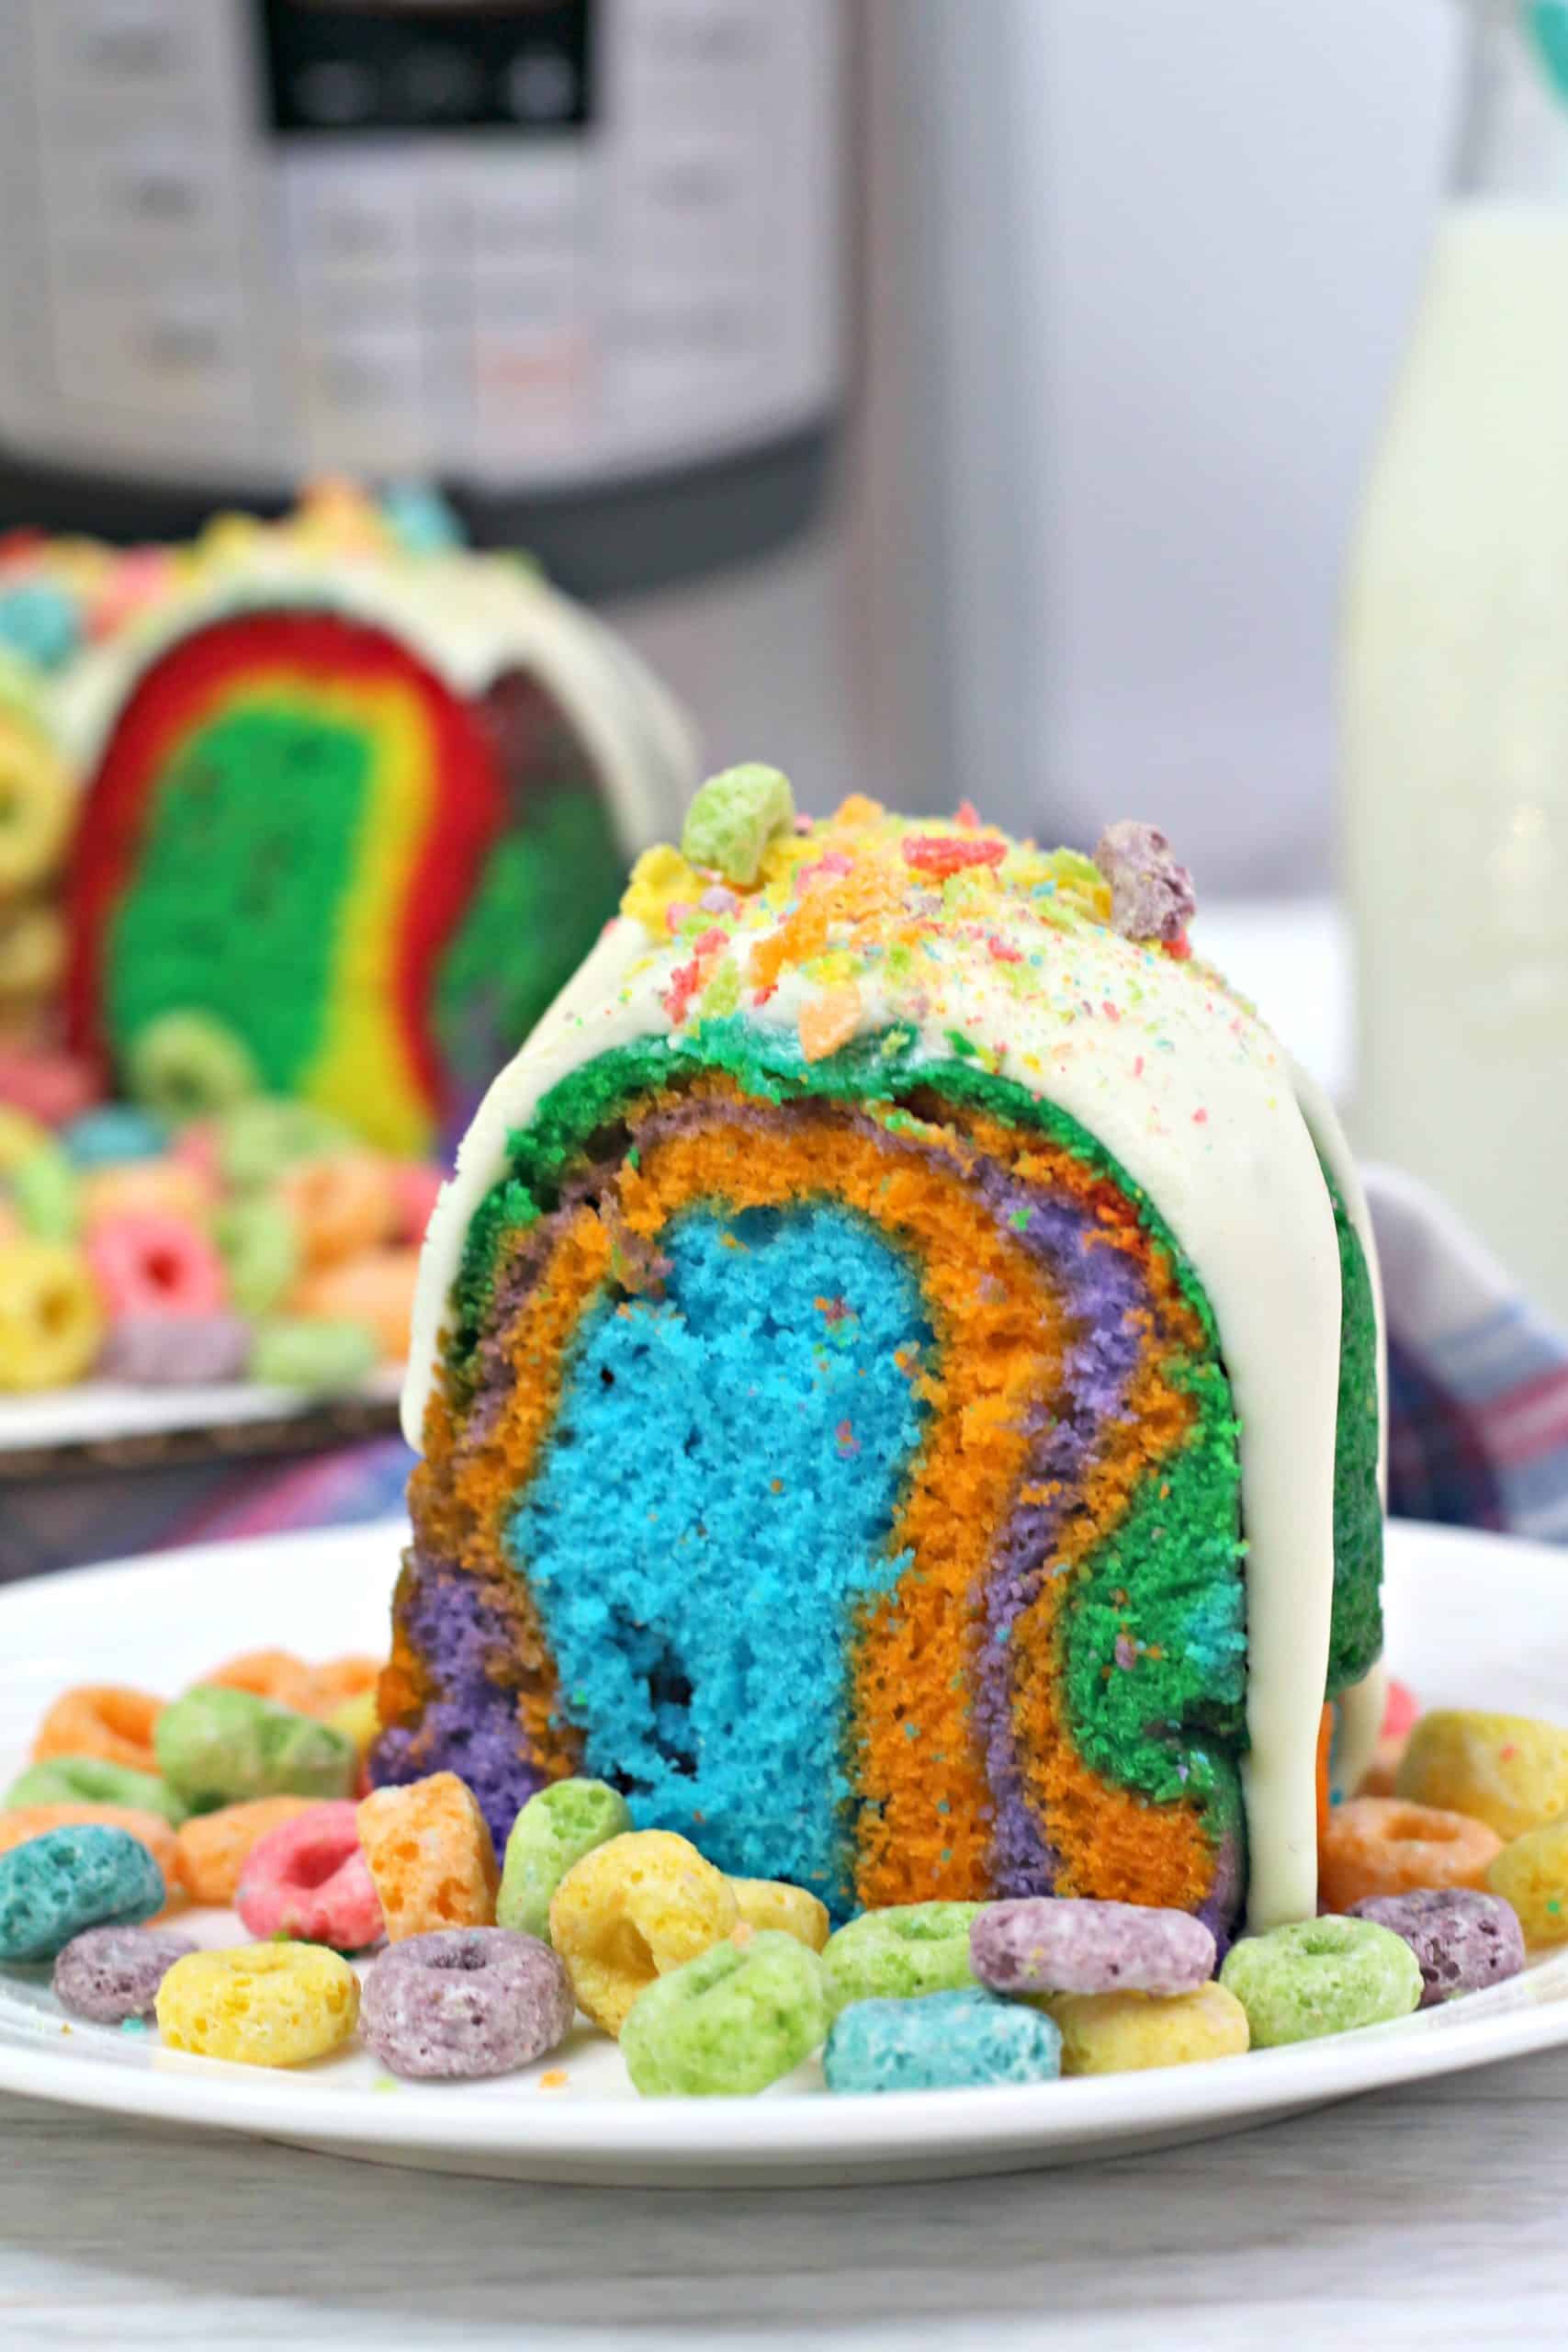 This Instant Pot rainbow Bundt cake has a crunchy surprise: colorful Fruit Loops! It's easier to make than you think. Here's how.